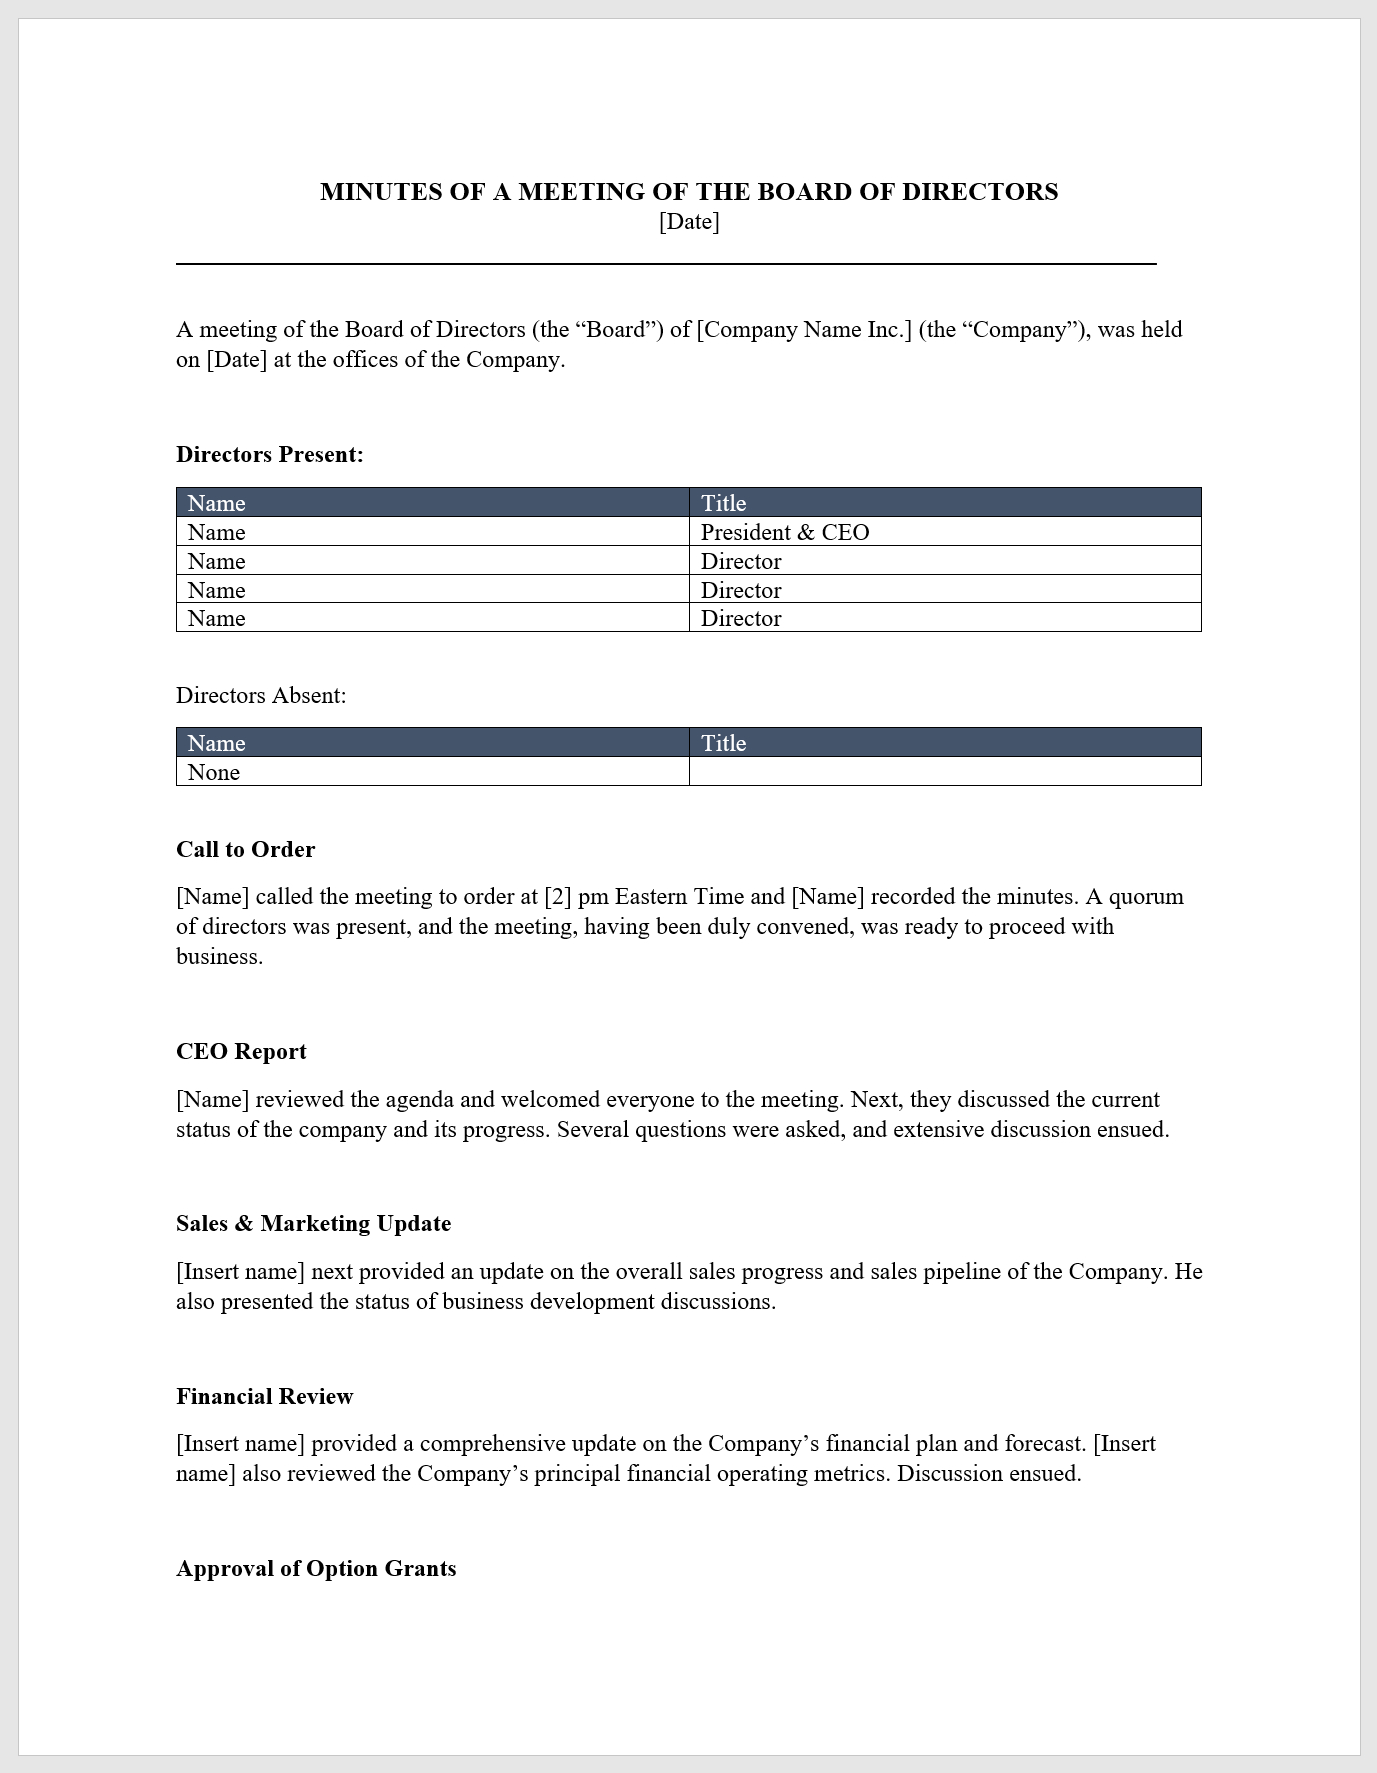 Board Meeting Minutes Template Download From Cfi Marketplace within dimensions 1377 X 1773